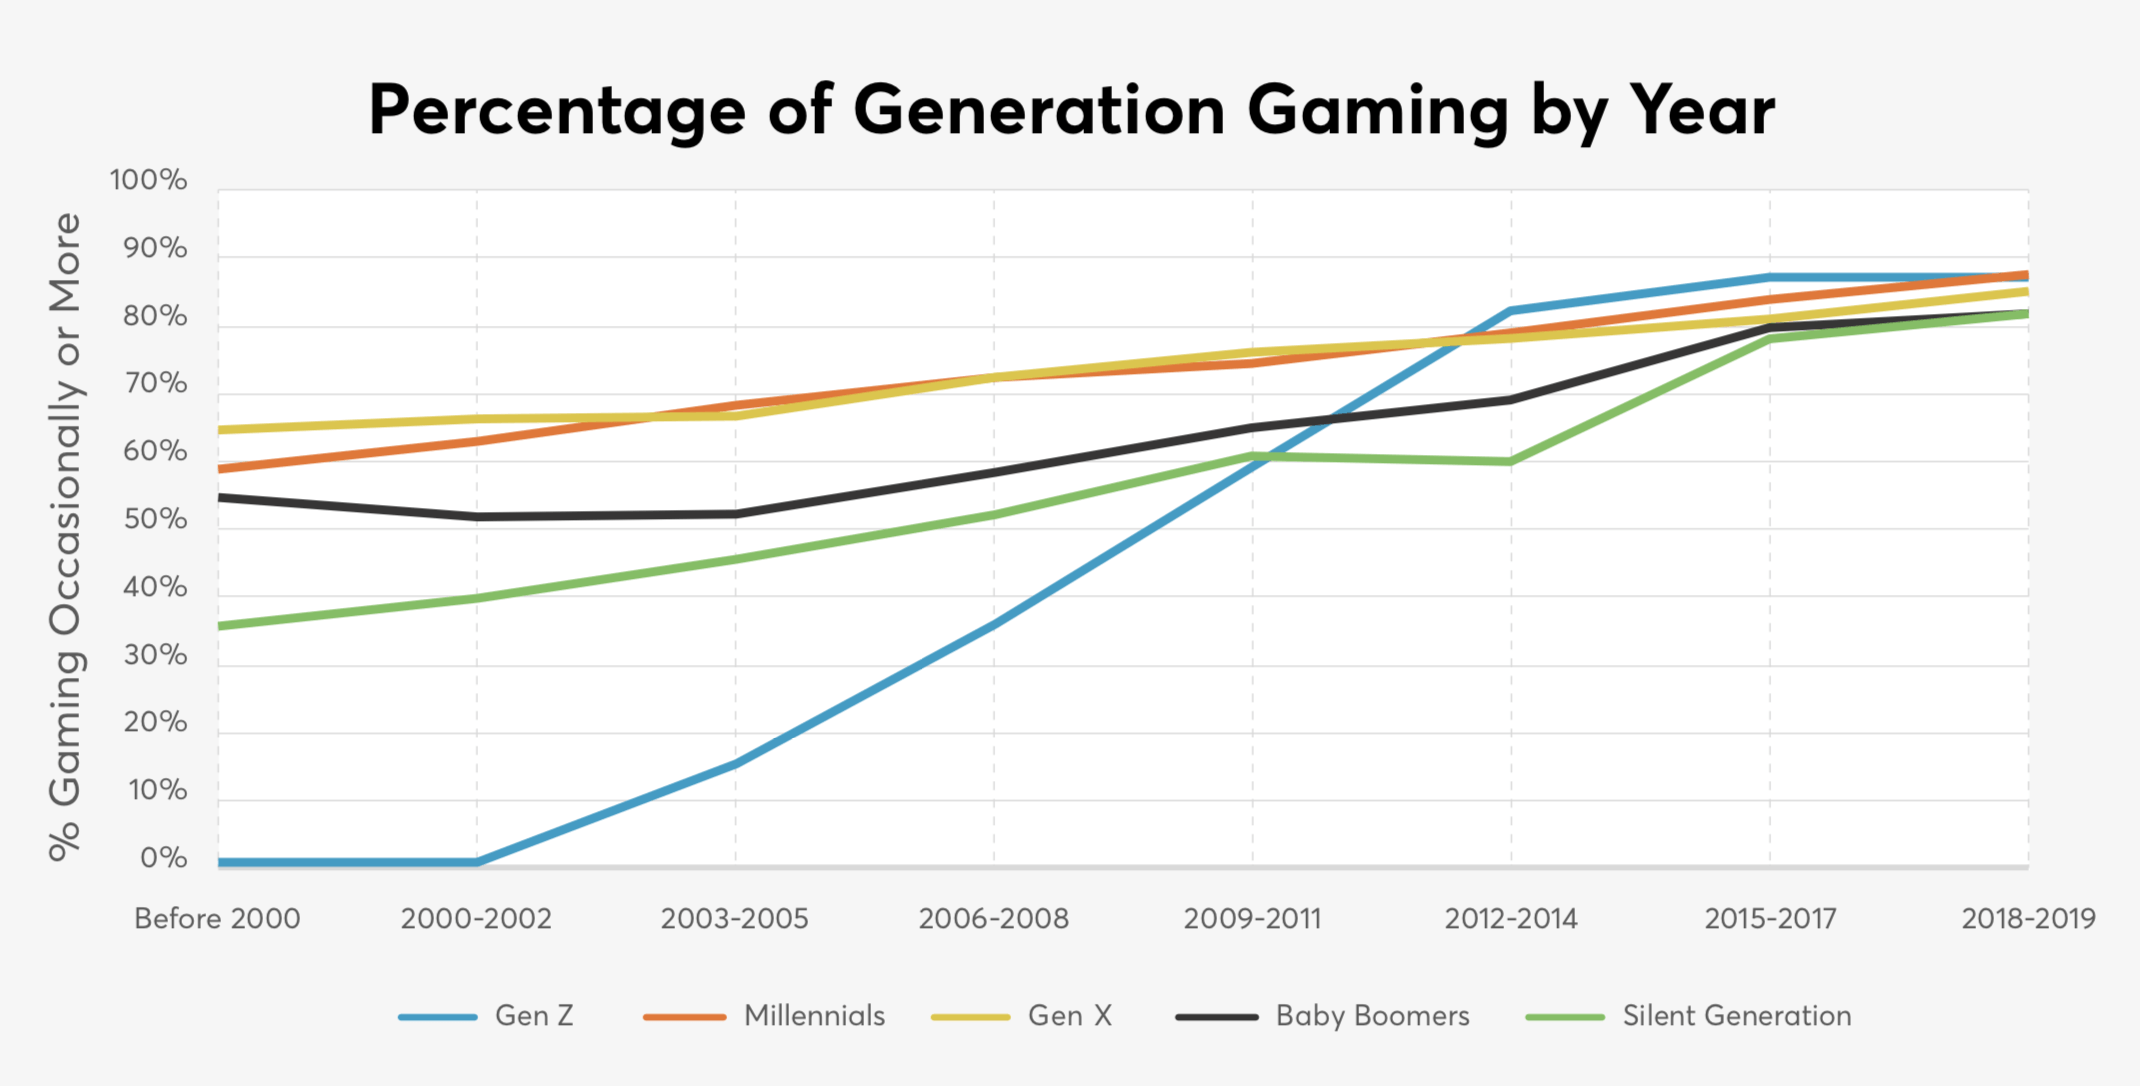 Graph depicting the percentage of each generation that plays video games and their growth over time